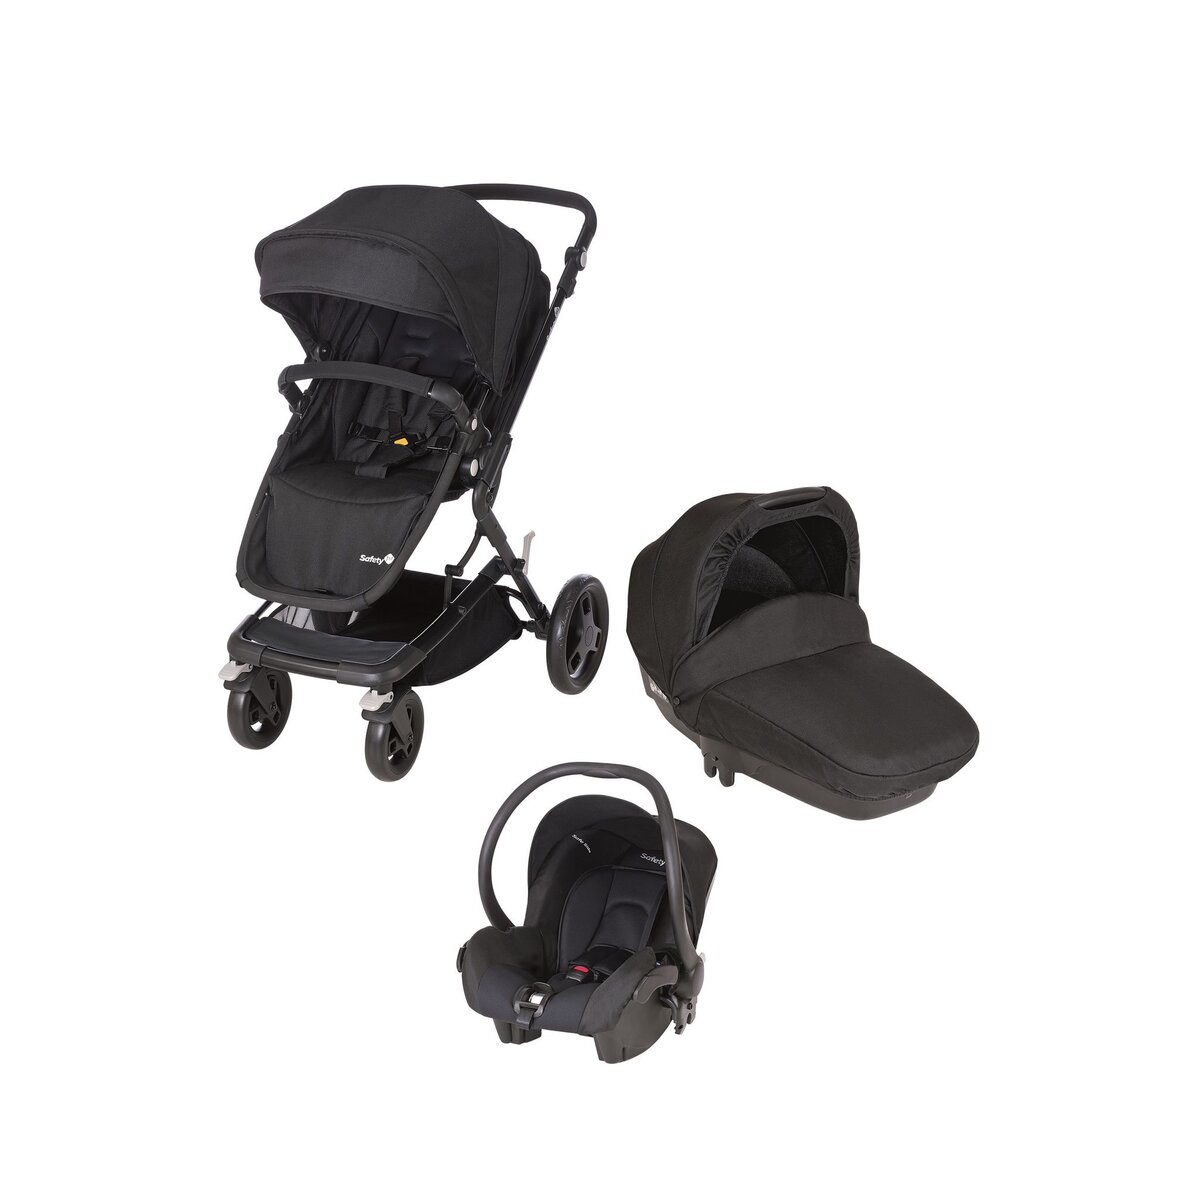 SAFETY FIRST Poussette combiné trio Kokoon